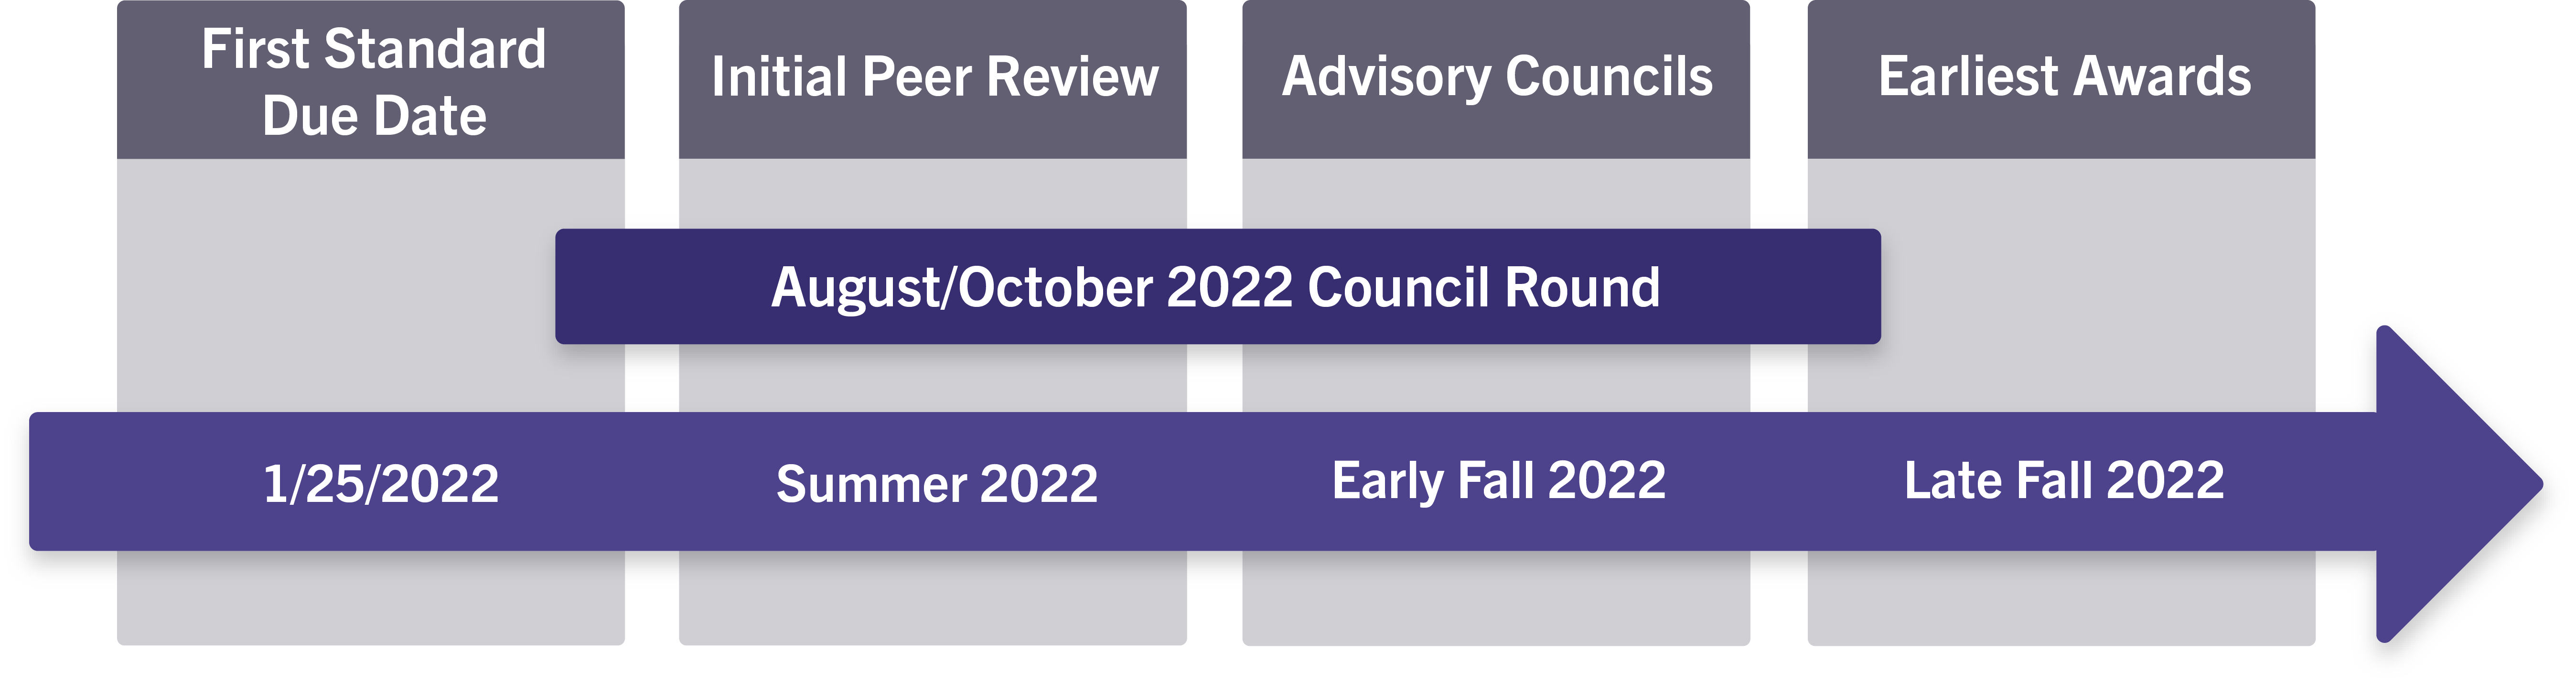 process flow for August/October 2021 Council Round - First Standard due date 1/25/2021, initial peer review Spring 2021, Advisory councils early Fall 2021, earliest awards late Fall 2021.